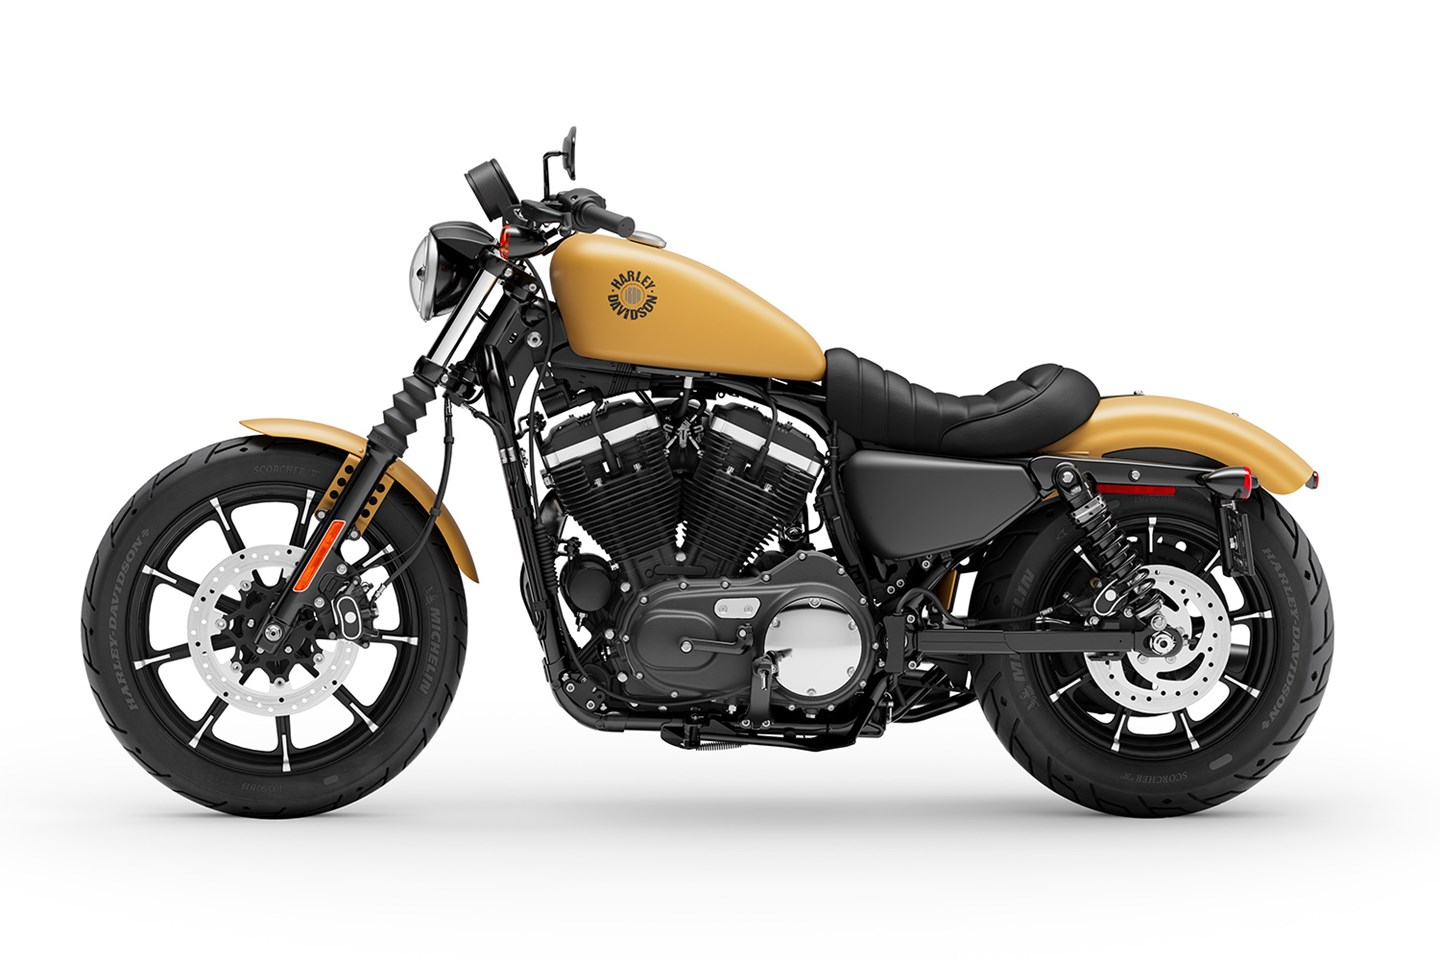 Iron 883 Problems: Common Hiccups & Fixes